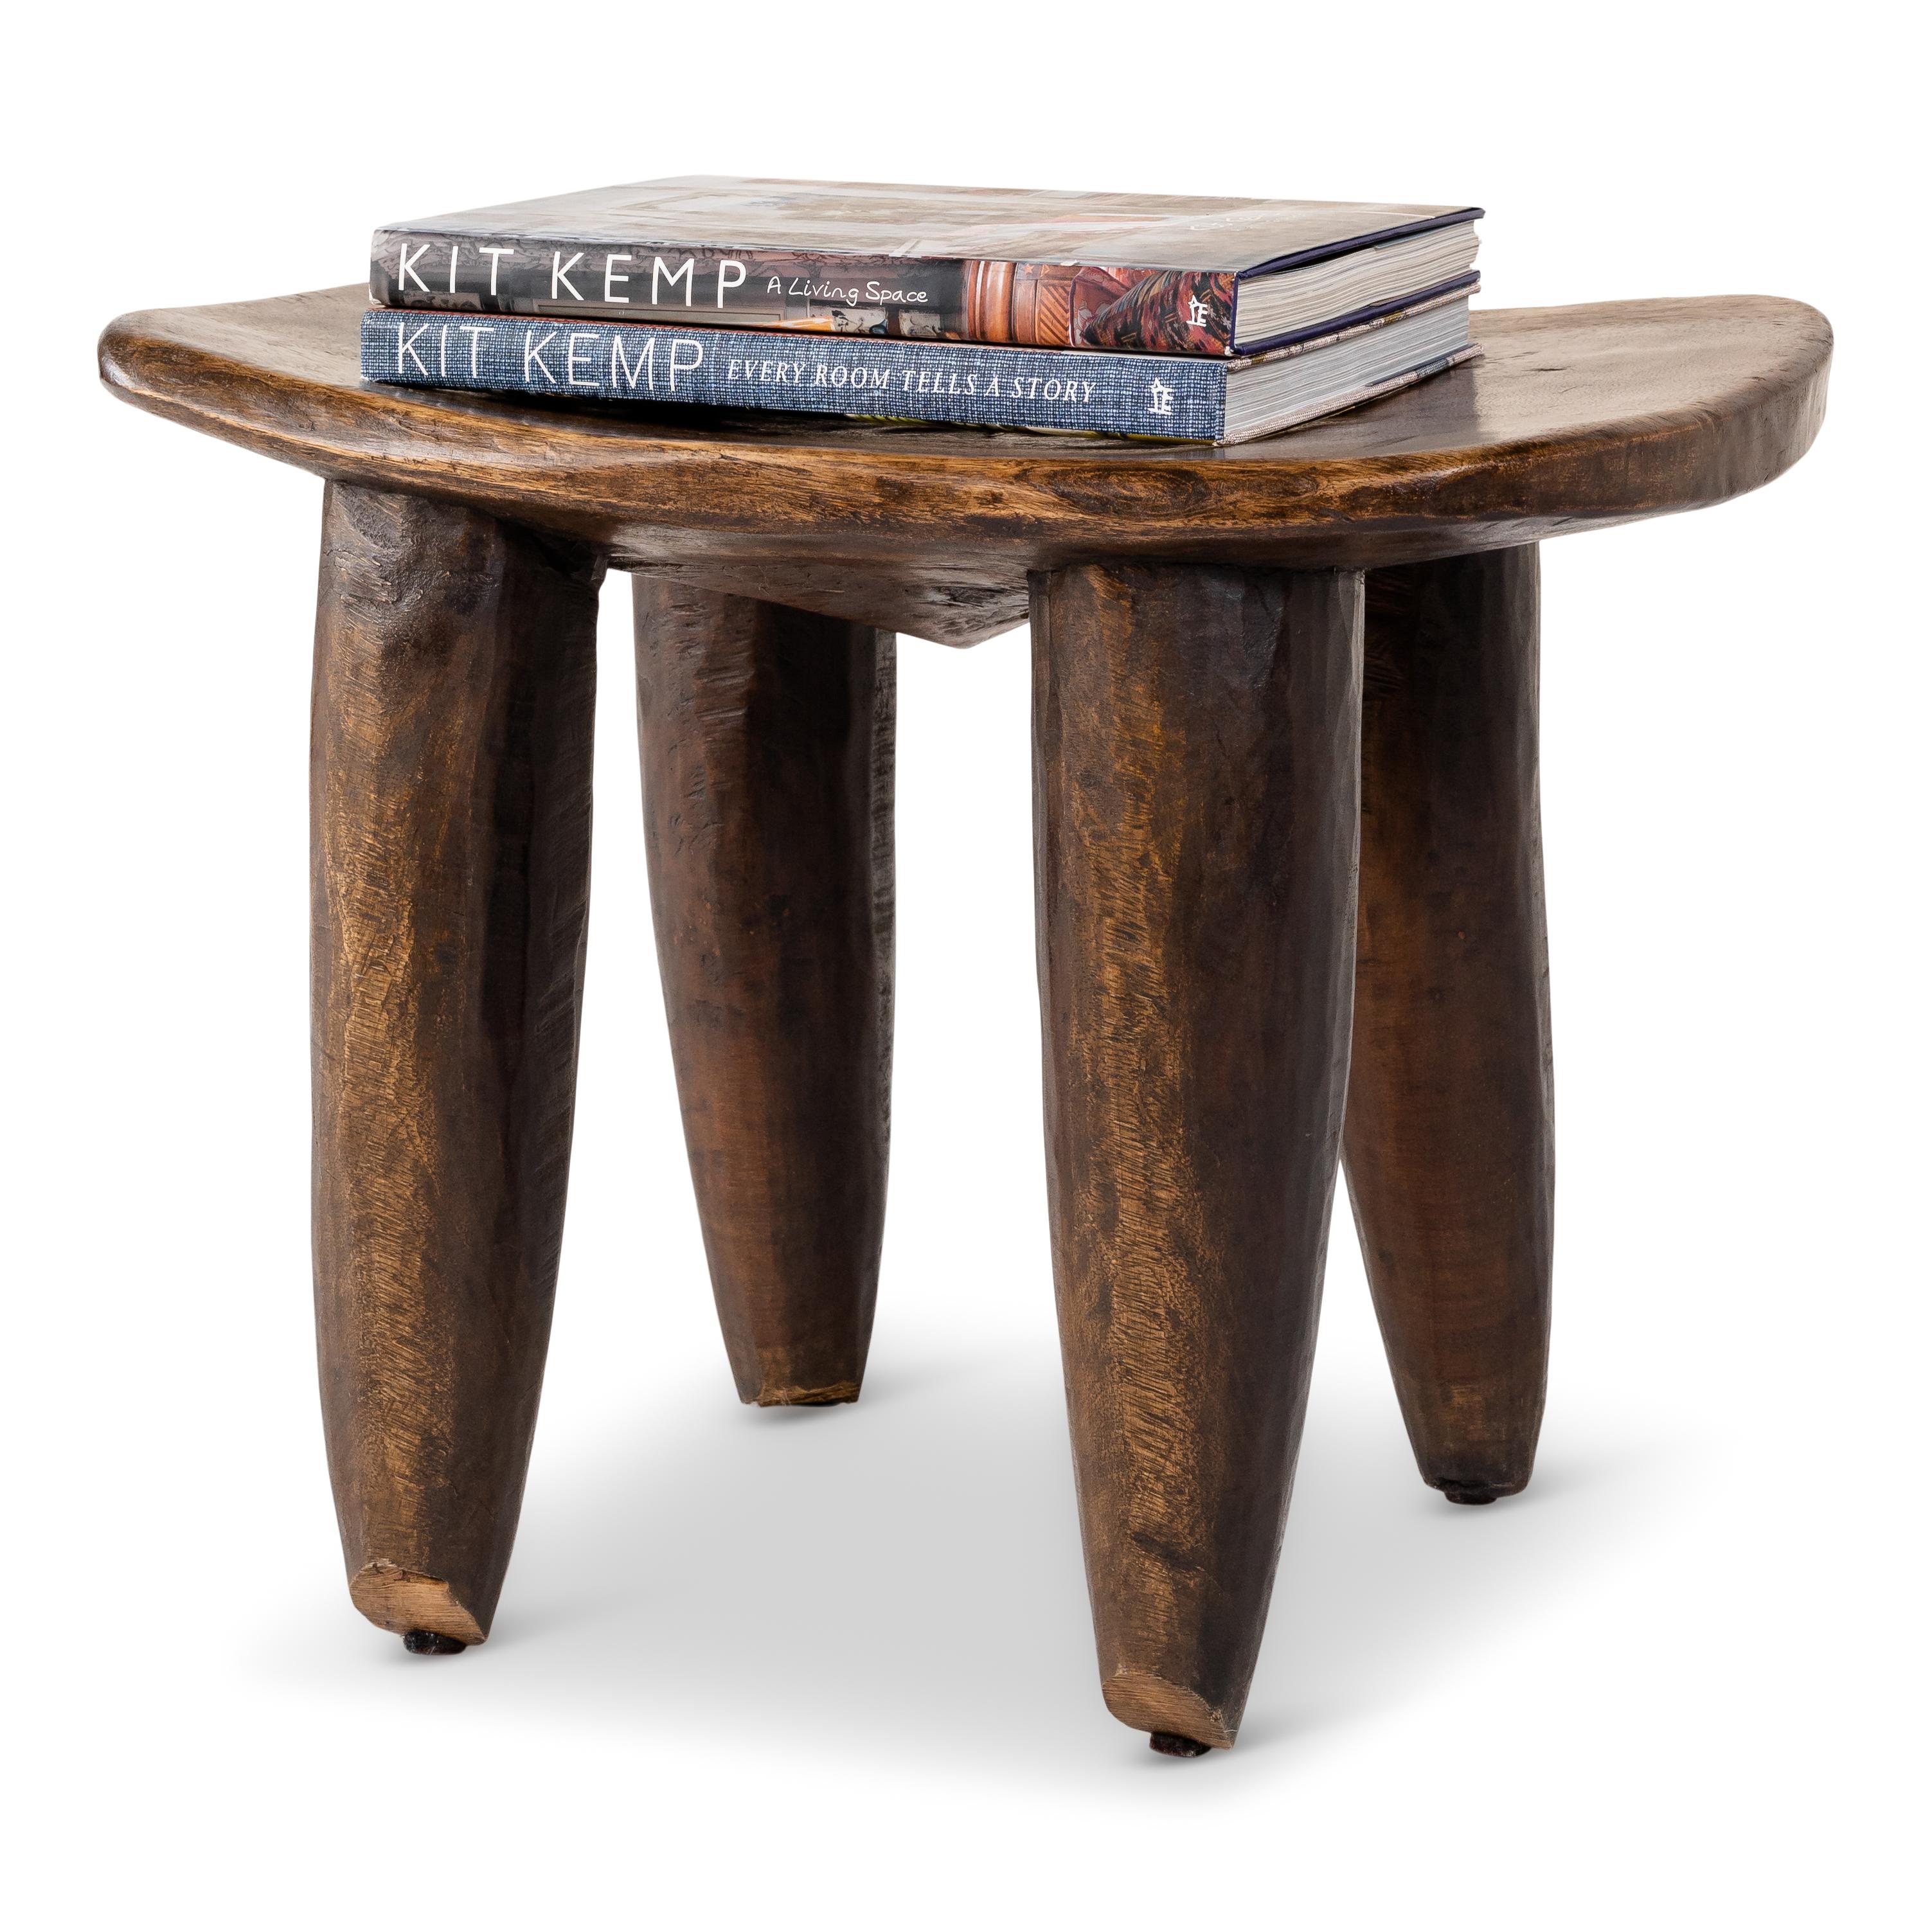 Hand carved African wood stools with tapered legs, curved seat, and a richly colored, smooth finish. 



  